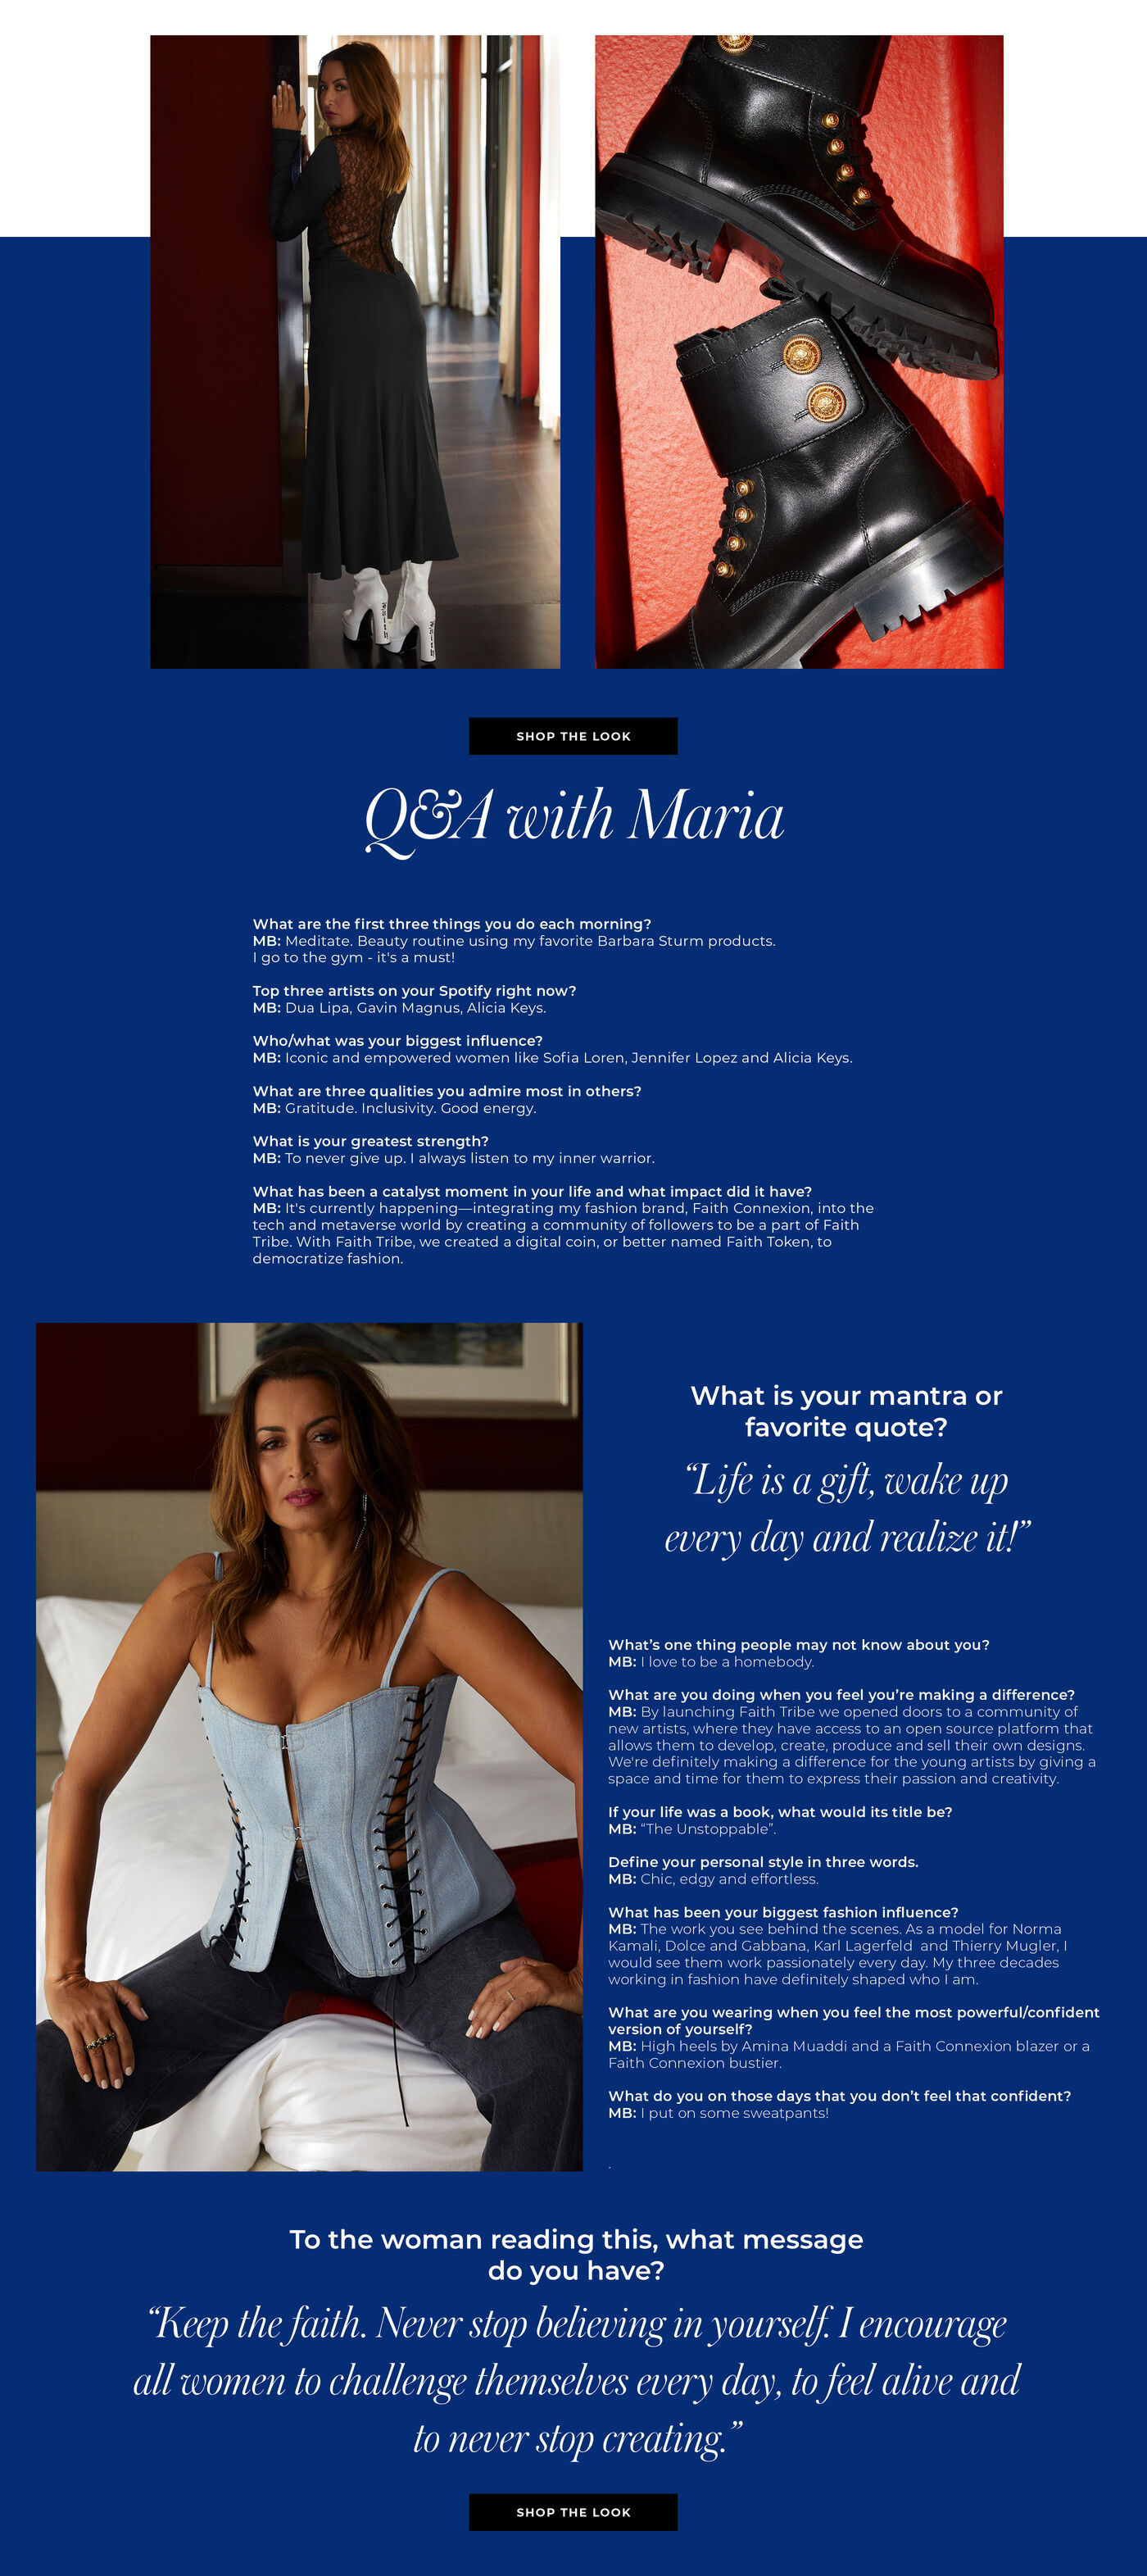 "Q&A WITH MARIA What are the first three things you do each morning? Meditate.  Beauty routine using my favorite Barbara Sturm products I go to the gym - it's a must!   Top three artists on your Spotify right now? Dua Lipa, Gavin Magnus, Alicia Keys.   Who/what was your biggest influence? Iconic and empowered women like Sofia Loren, Jenifer Lopez and Alicia Keys.   What are three qualities you admire most in others? Gratitude.  Inclusivity.  Good energy.   What is your greatest strength? To never give up. I always listen to my inner warrior.    What has been a catalyst moment in your life and what impact did it have? It's currently happening—integrating my fashion brand, Faith Connexion, into the tech and metaverse world by creating a community of followers to be a part of Faith Tribe.  With Faith Tribe, we created a digital coin, or better named Faith Token, to democratize fashion.  What is your mantra or favorite quote? ""Life is a gift, wake up every day and realize it!""  What’s one thing people may not know about you? I love to be a homebody.    What are you doing when you feel you’re making a difference? By launching Faith Tribe we opened doors to a community of new artists, where they have access to an open source platform that allows them to develop, create, produce and sell their own designs. We're definitely making a difference for the young artists by giving a space and time for them to express their passion and creativity.  If your life was a book, what would its title be? ""The Unstoppable""   Define your personal style in three words. Chic, Edgy and Effortless   What has been your biggest fashion influence? The work you see behind the scenes. As a model for Norma Kamali, Dolce and Gabbana, Karl Lagerfeld  and Thierry Mugler, I would see them work passionately every day. My three decades working in fashion have definitely shaped who I am.    What are you wearing when you feel the most powerful/confident version of yourself? High heels by Amina Muaddi and a Faith Connexion blazer or a Faith Connexion Bustier   What do you on those days that you don’t feel that confident? I put on some sweatpants!  To the woman reading this, what message do you have? ""Keep the faith. Never stop believing in yourself. I encourage all women to challenge themselves every day, to feel alive and to never stop creating. "" "